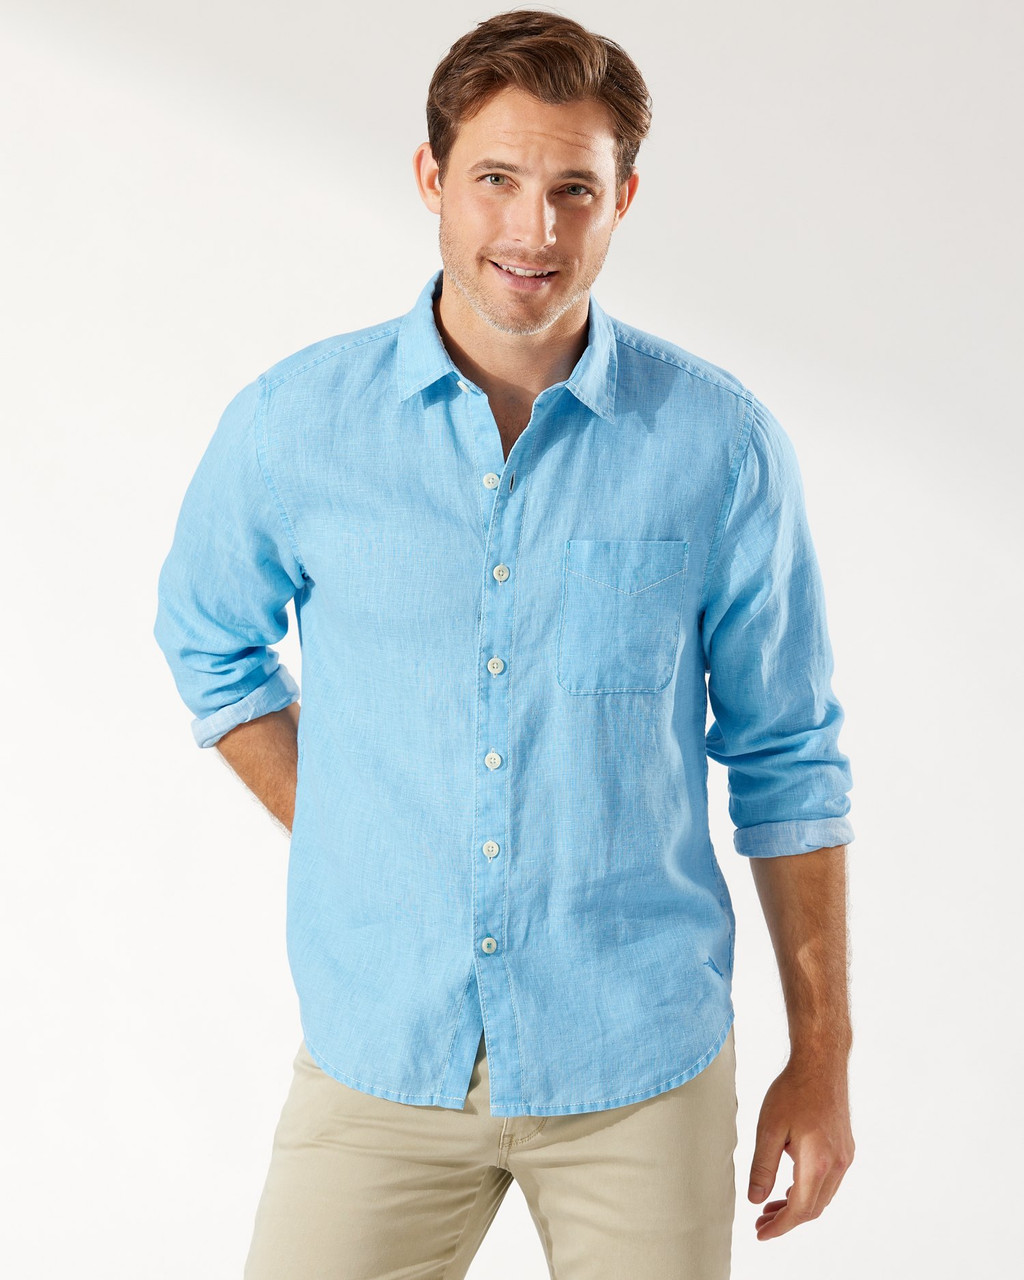 Feel the finest look in the newest Premium Linen Long Sleeve Shirt